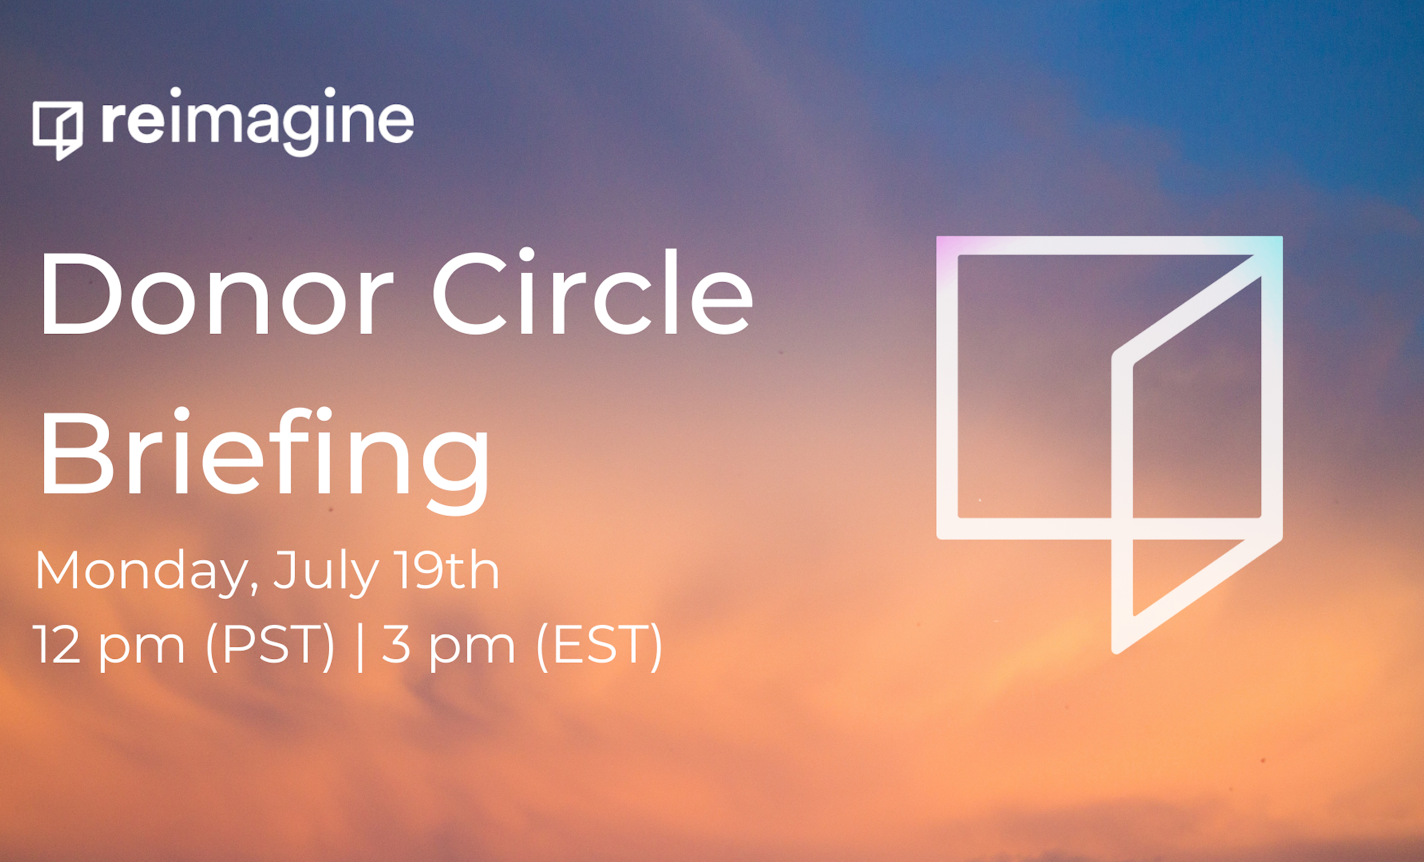 Reimagine’s Donor Circle Briefing on 7/19